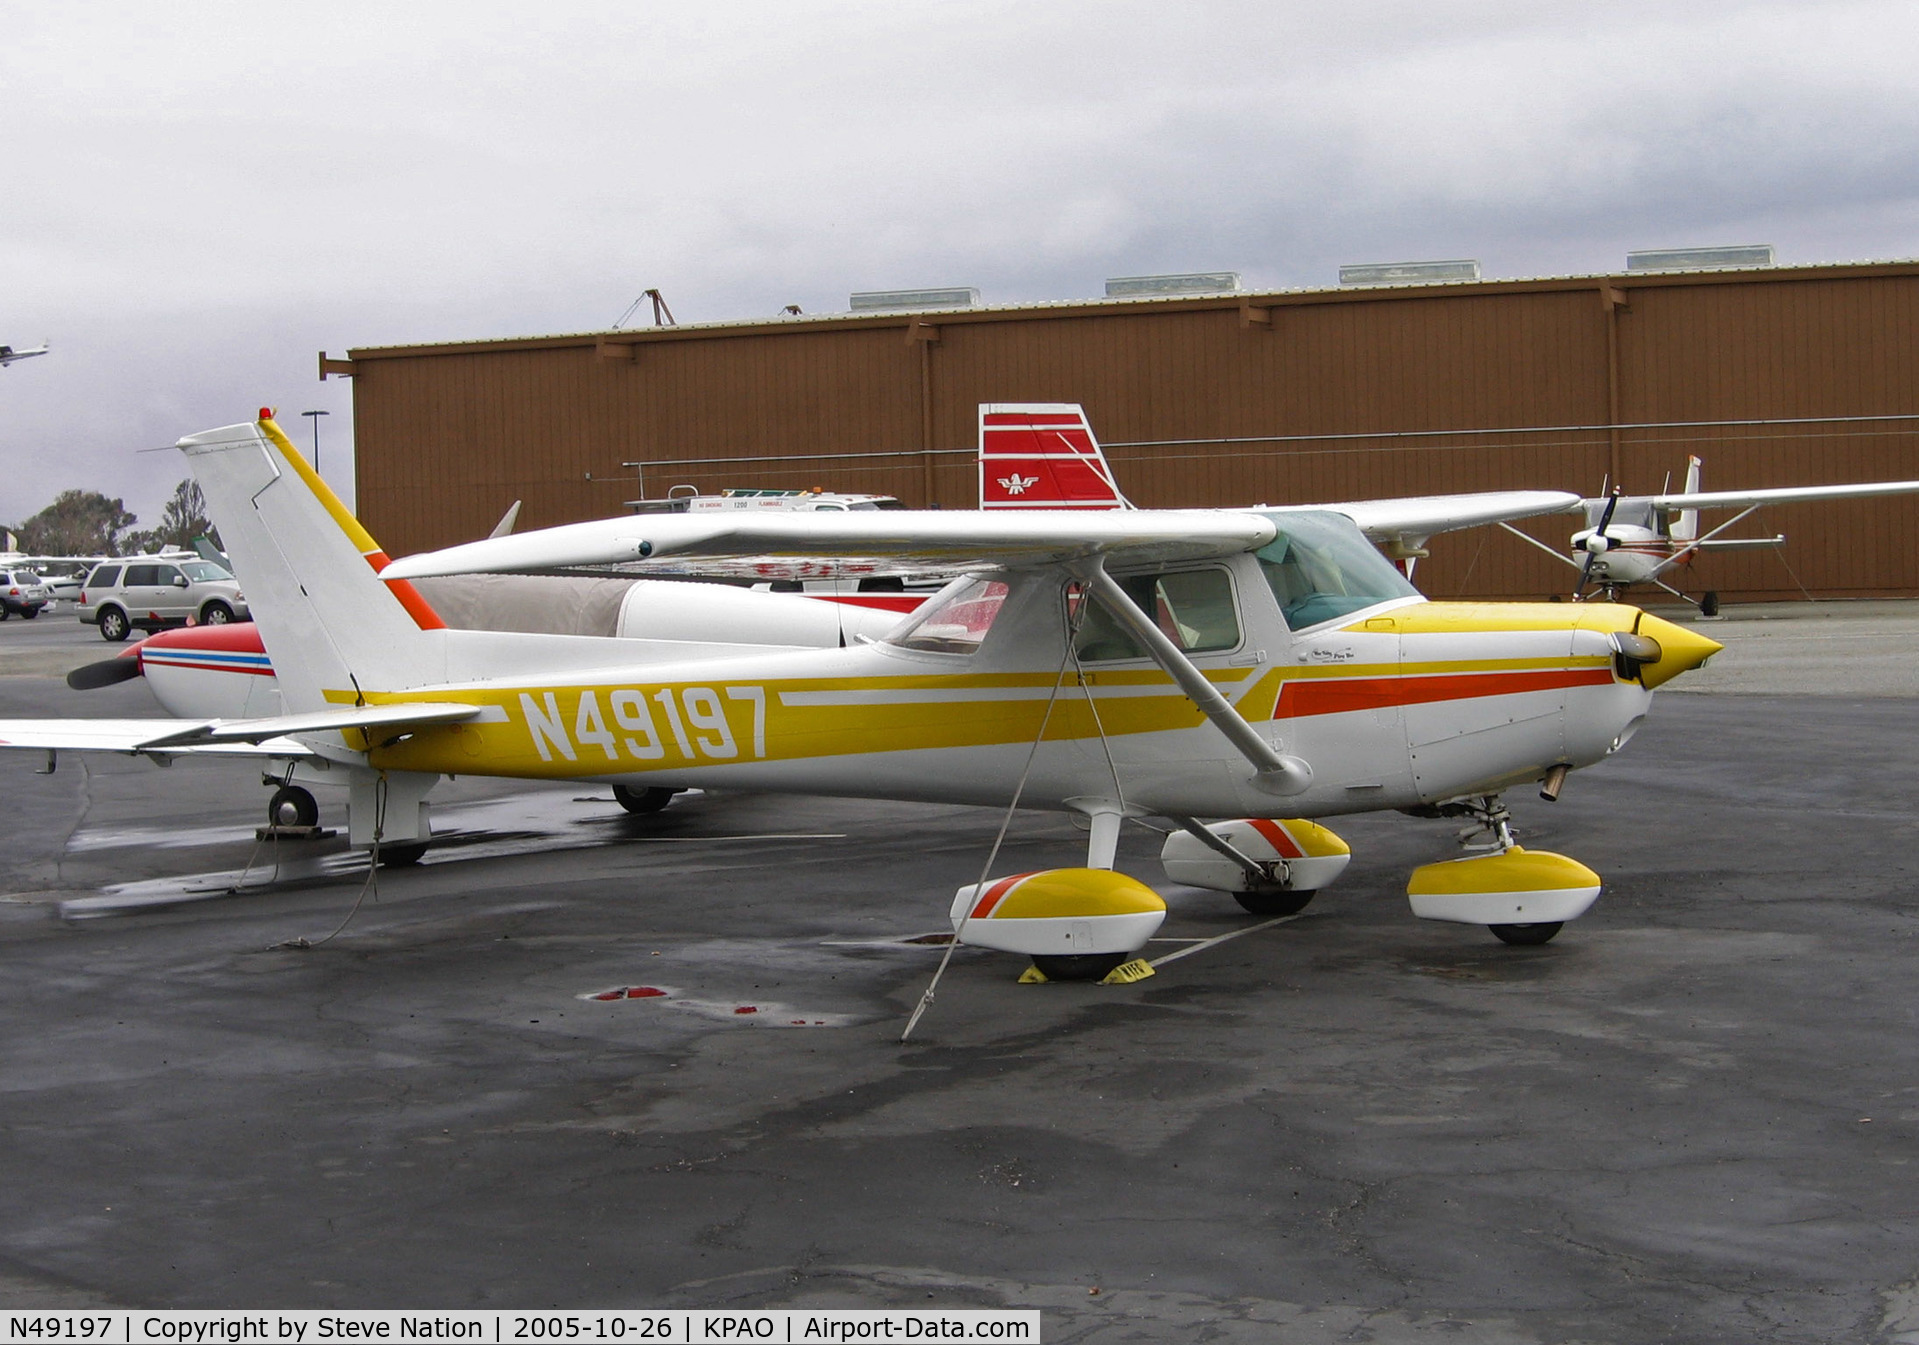 N49197, 1977 Cessna 152 C/N 15281188, 1977 Cessna 152 with white rudder @ Palo Alto, CA